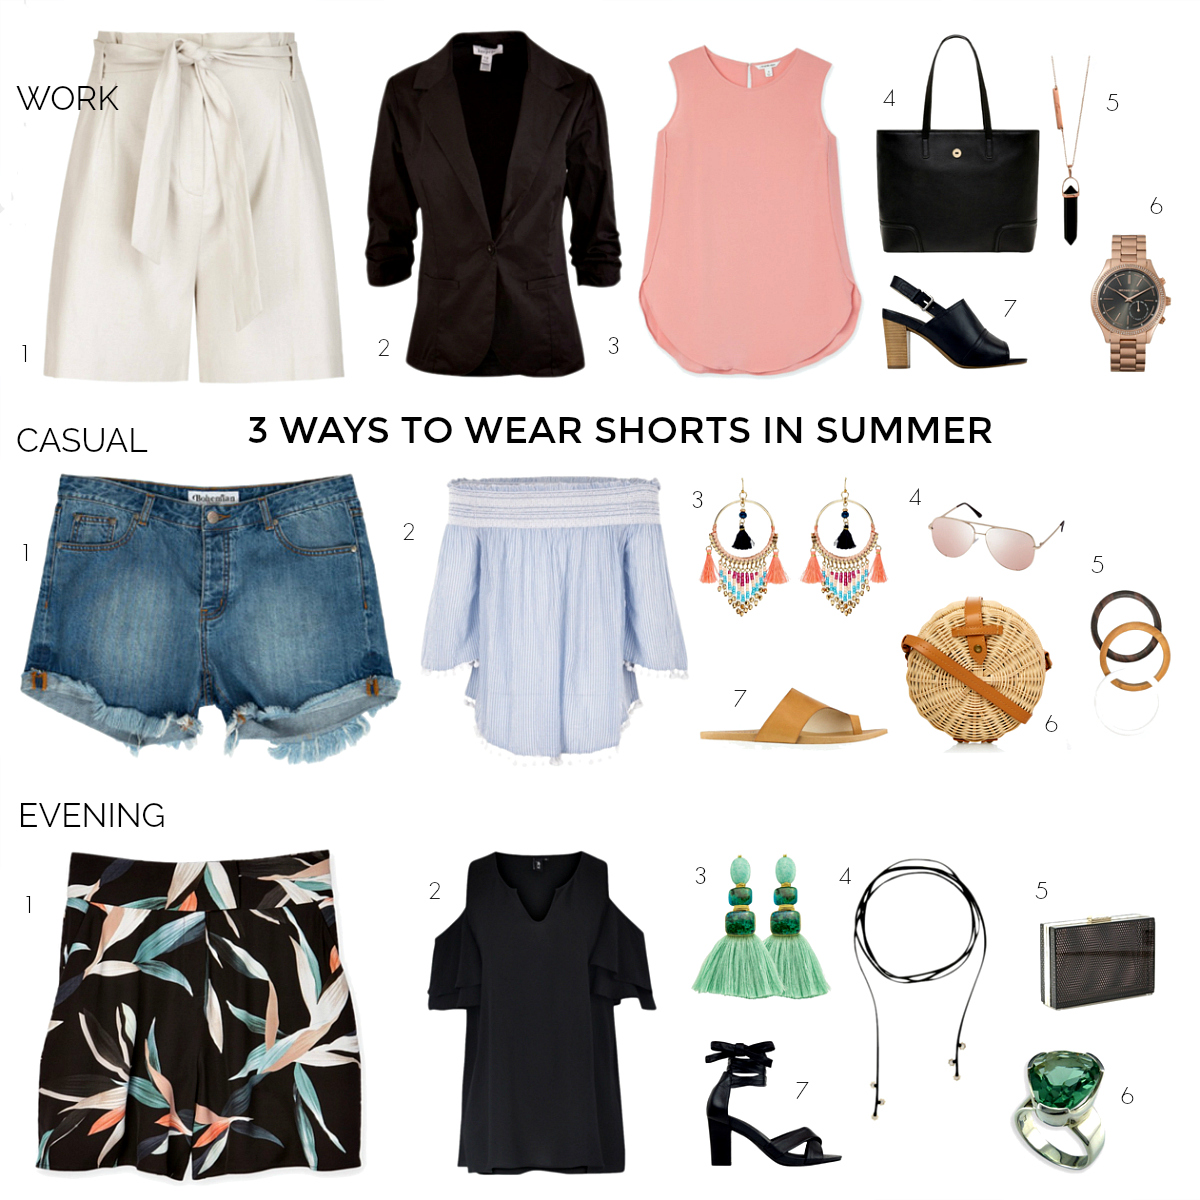 3 ways to wear shorts in summer but still feel dressed up